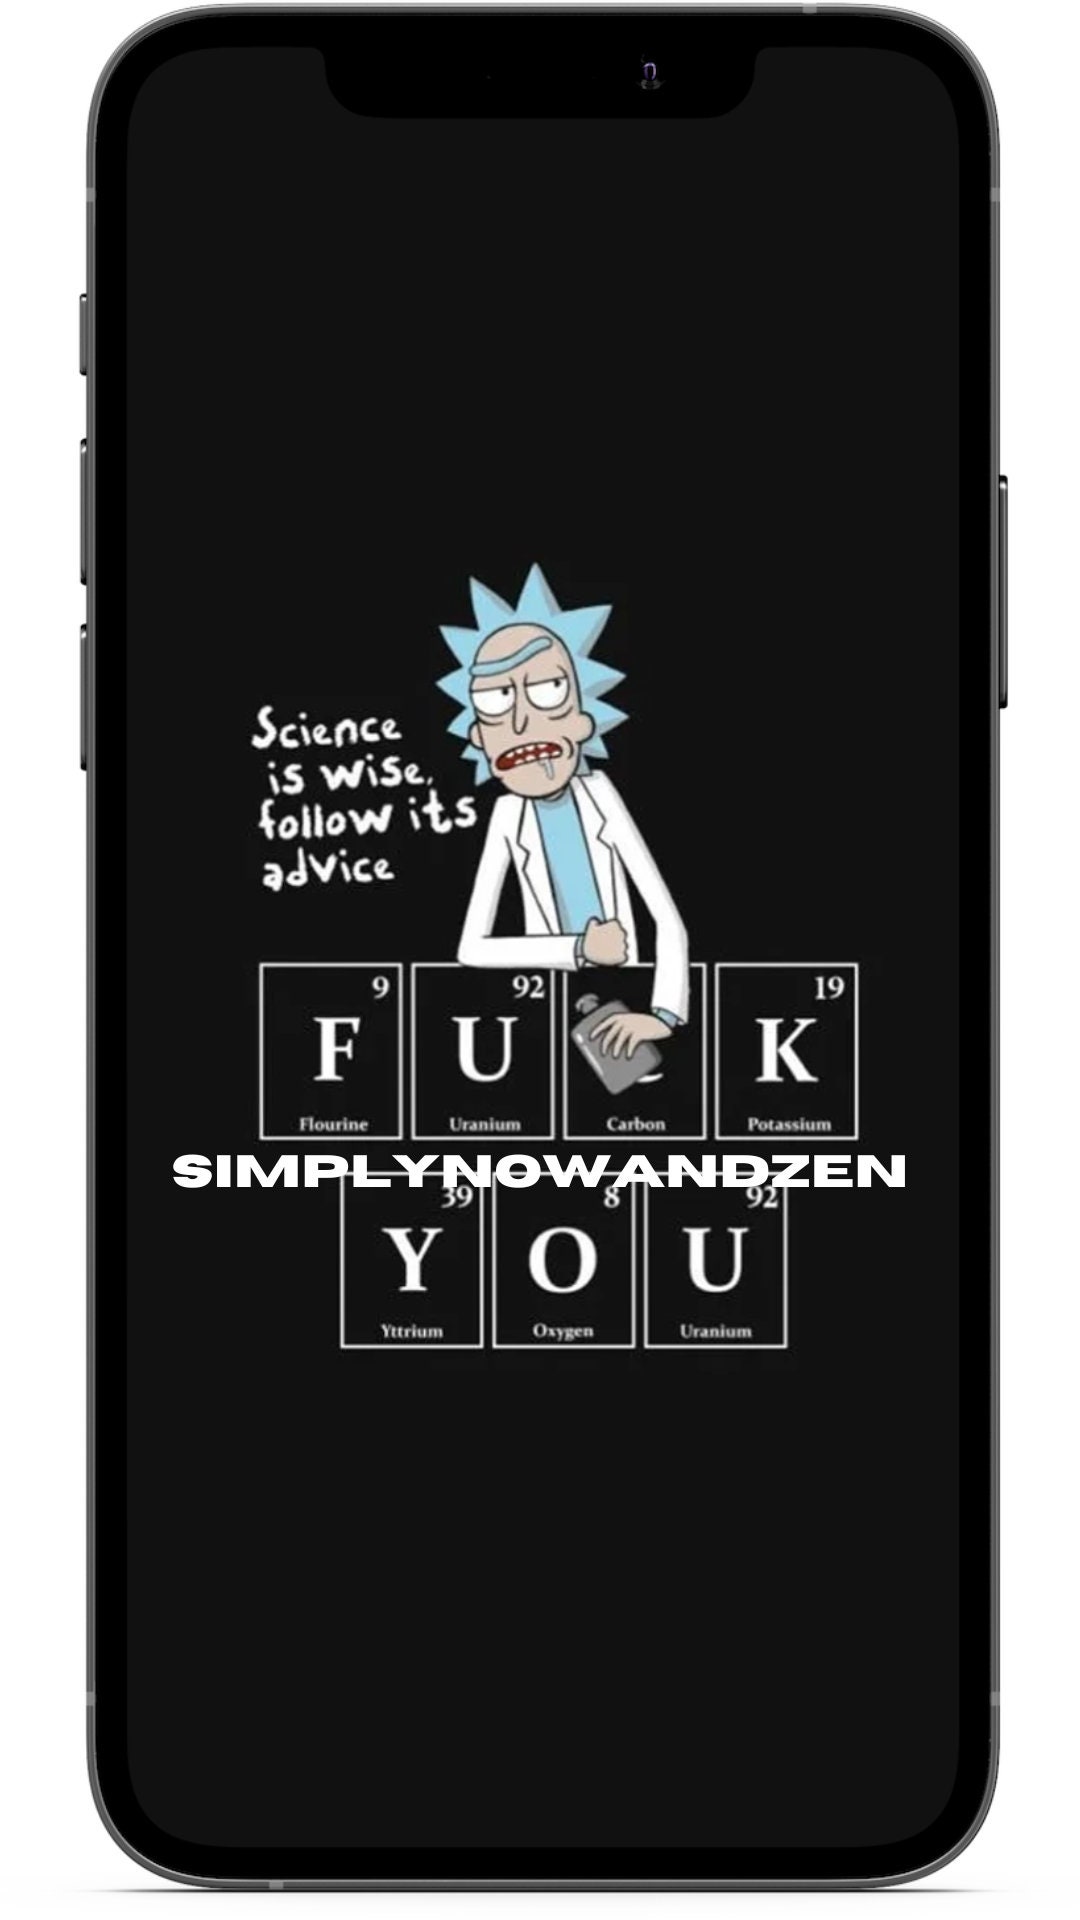 Rick and Morty phone wallpaper» HD Wallpapers